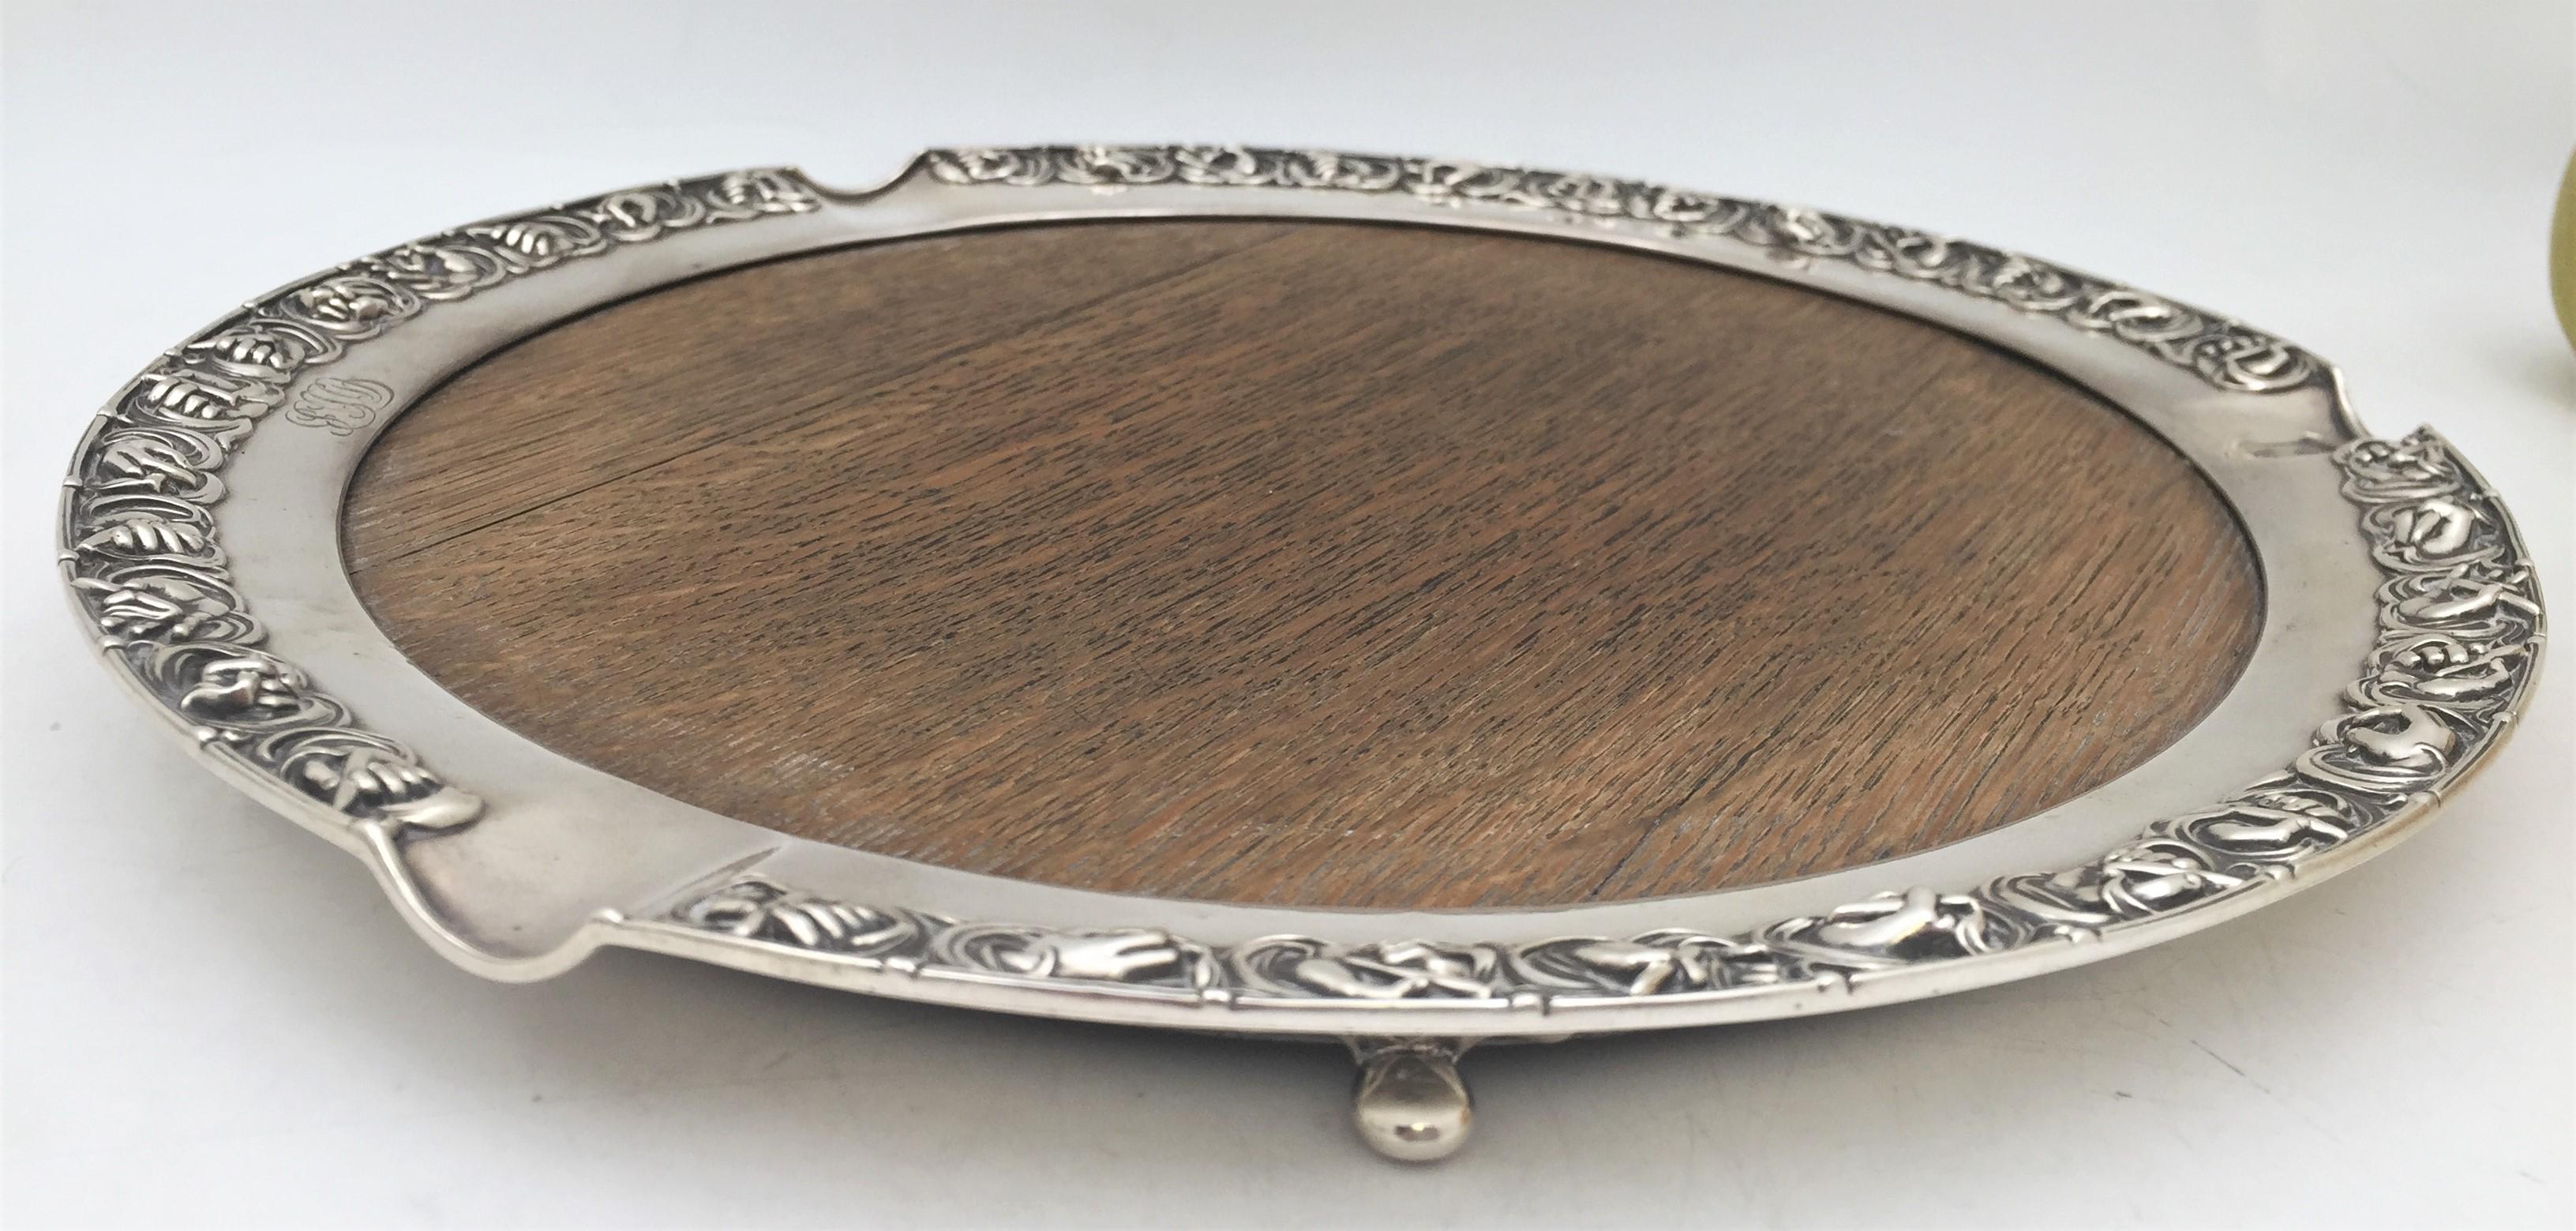 Rare Gorham, sterling silver and oak wood tray from 1917 with an ornate border with hand motifs in relief standing on 4 balled feet. It measures 13 1/4'' in diameter by 1 1/4'' in height and bears hallmarks as shown. 

During the heyday of American